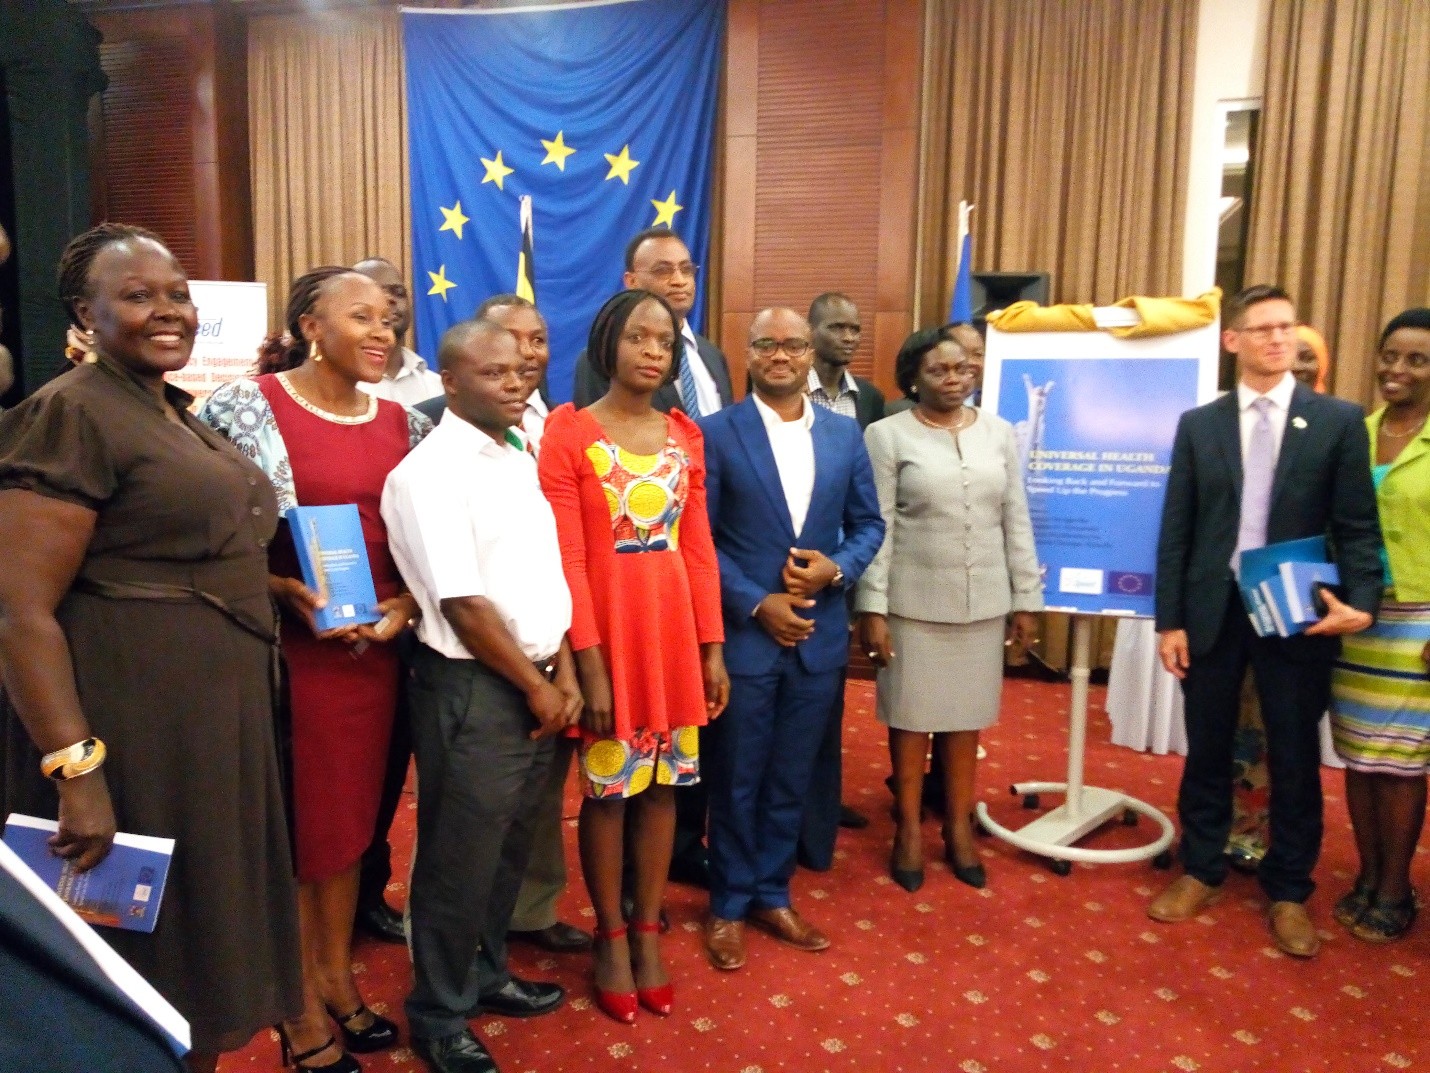 Some of the 30 author team pose for a photograph besides the book dummy together with Hon Opendi and Mr. Tiedemann